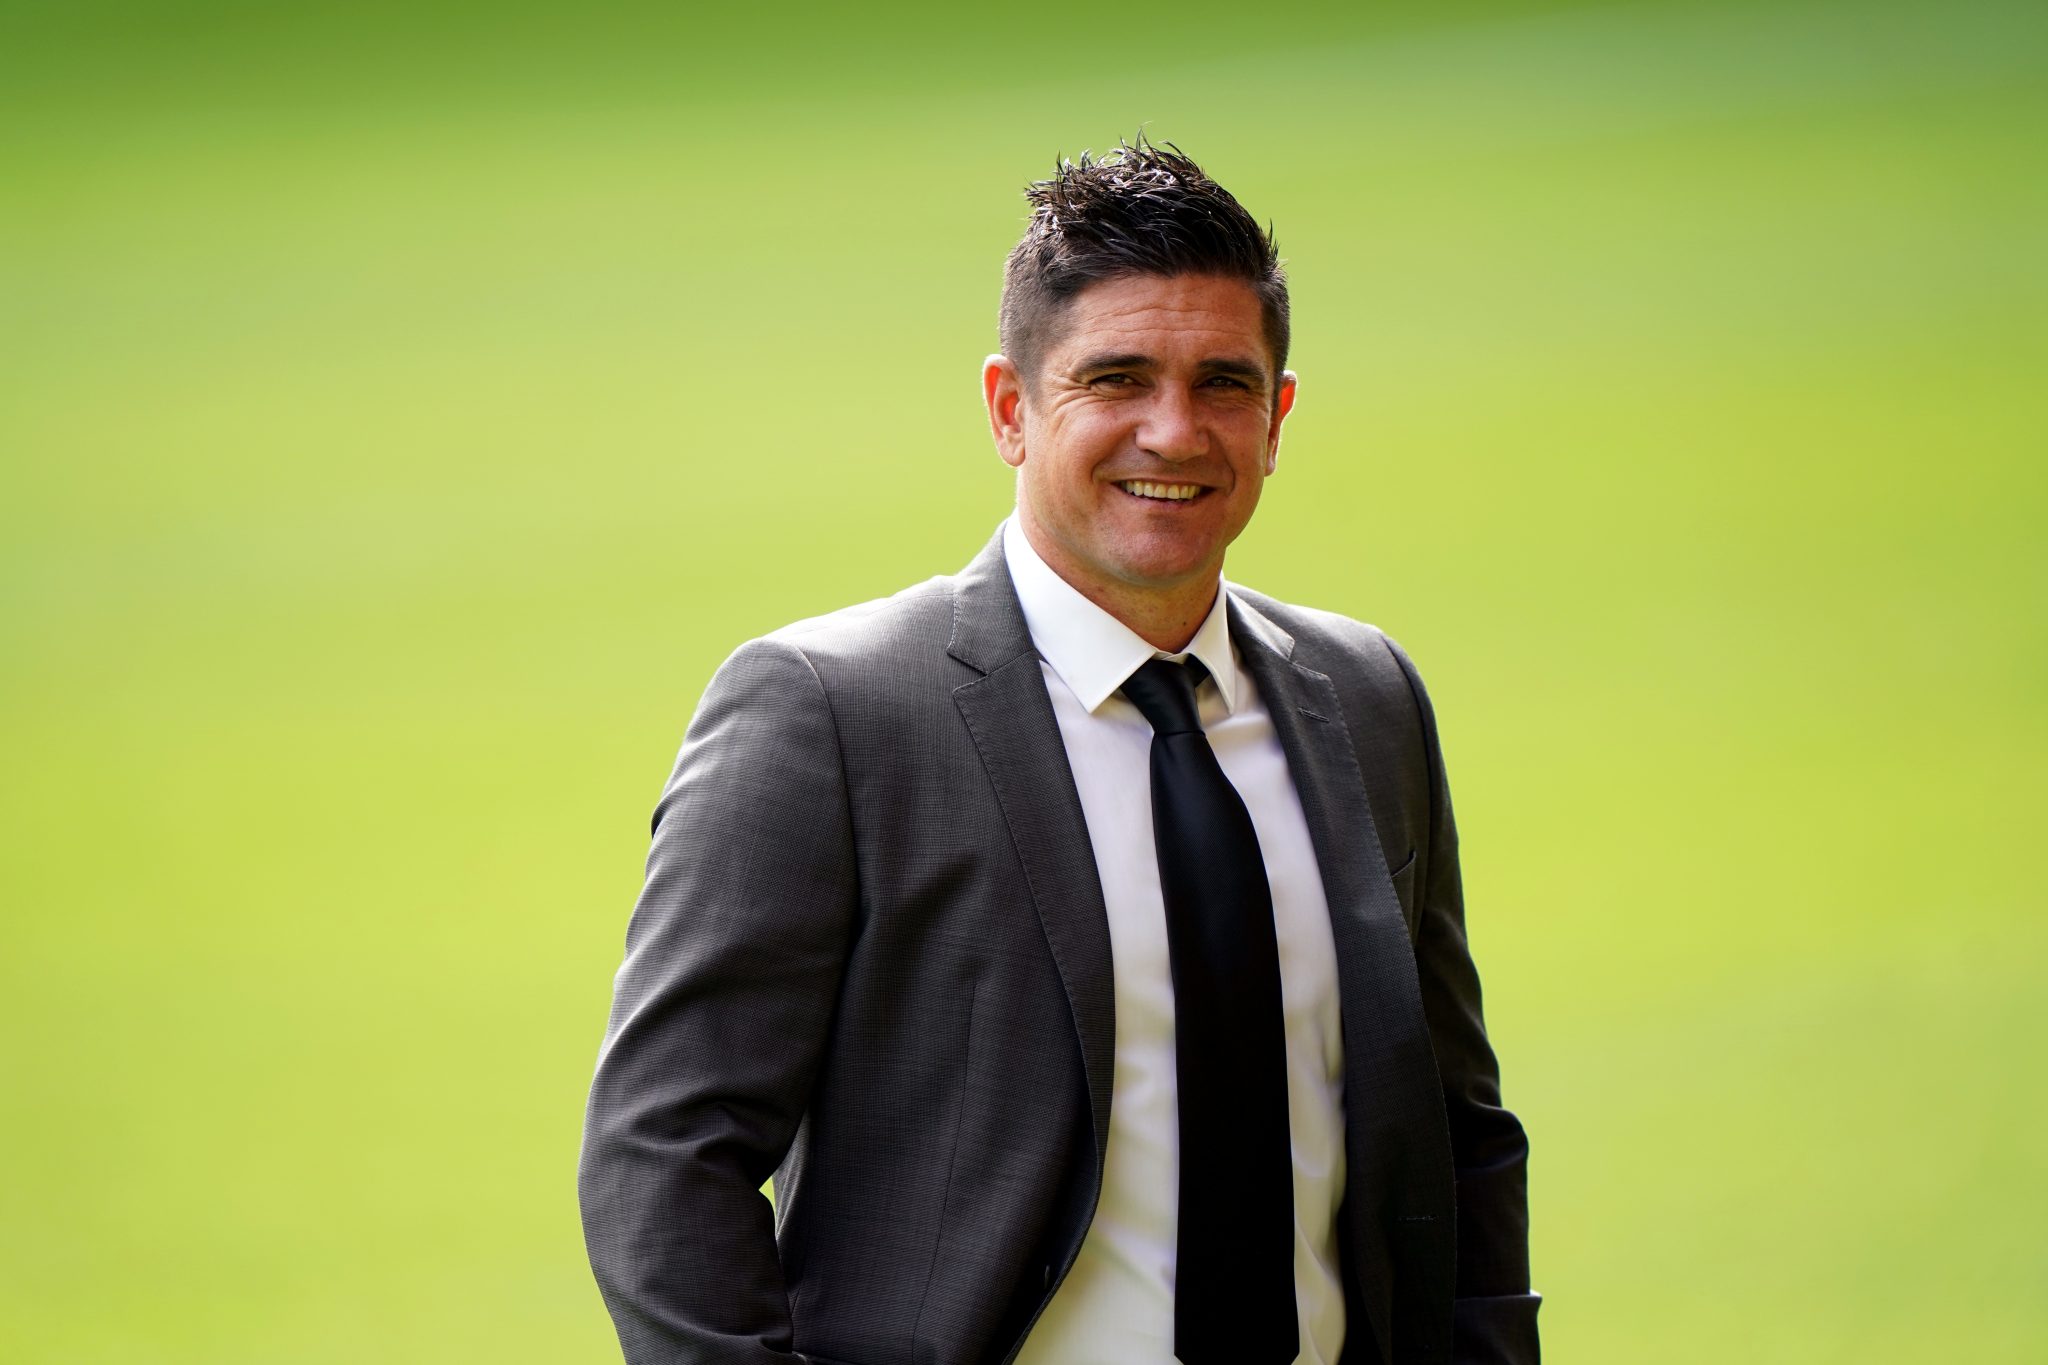 Sheffield Wednesday appoint former Watford boss Xisco Munoz as their new manager